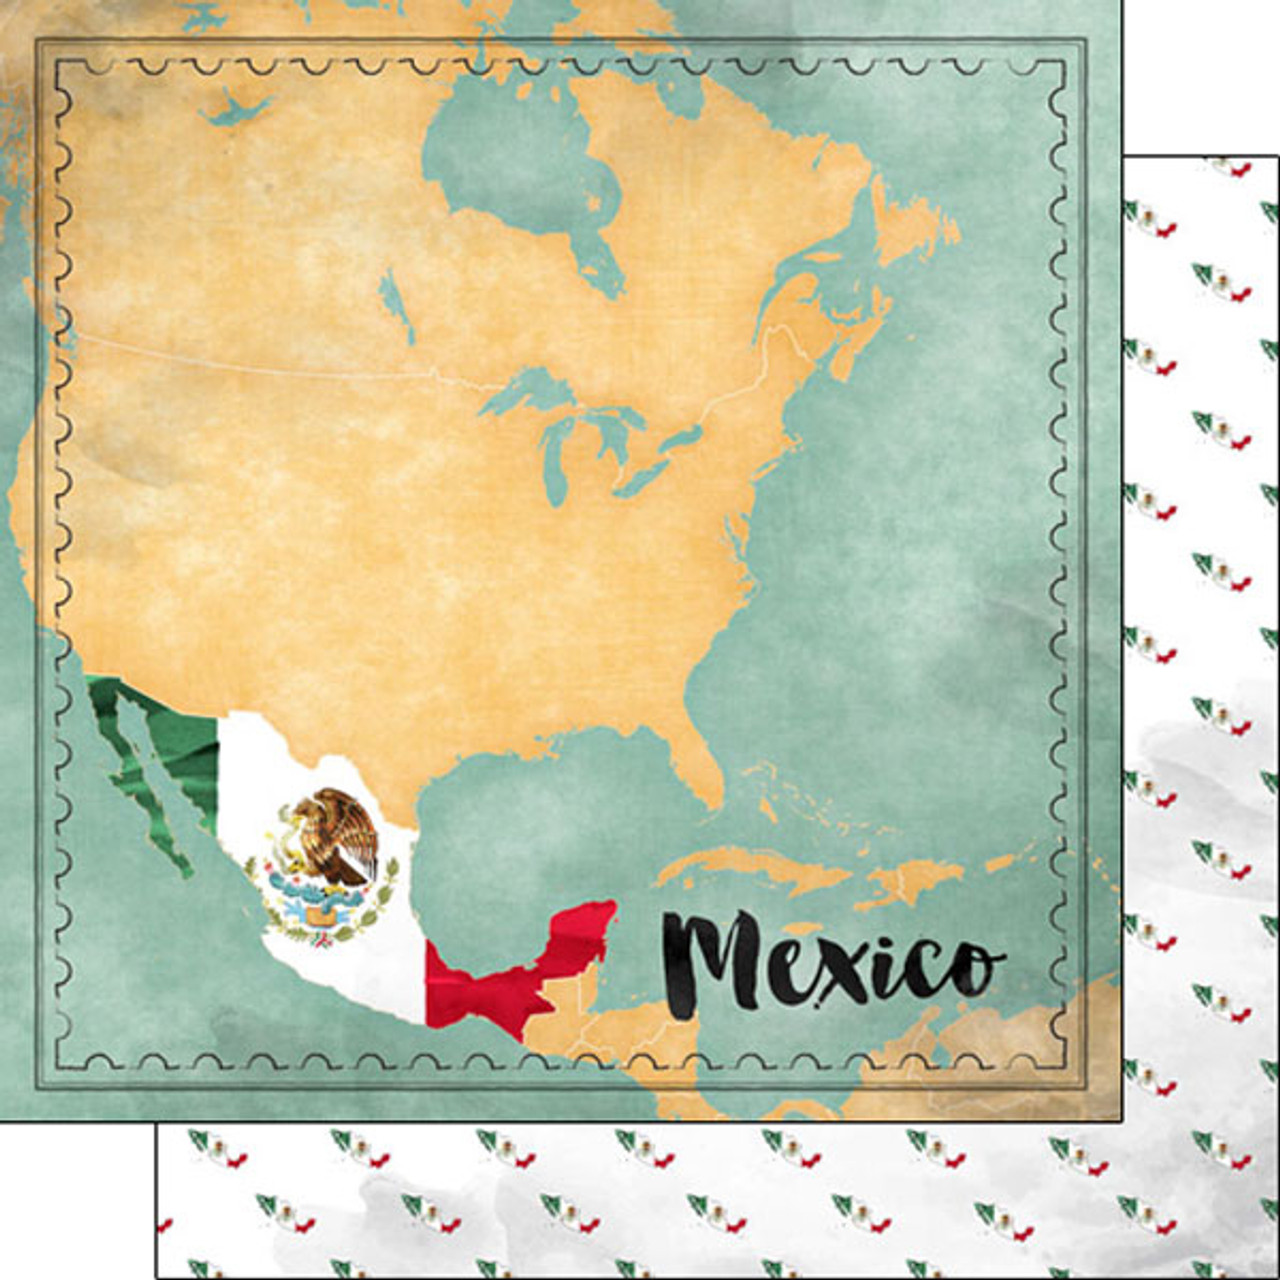 Mexico travel scrapbook stickers patches badges Vector Image